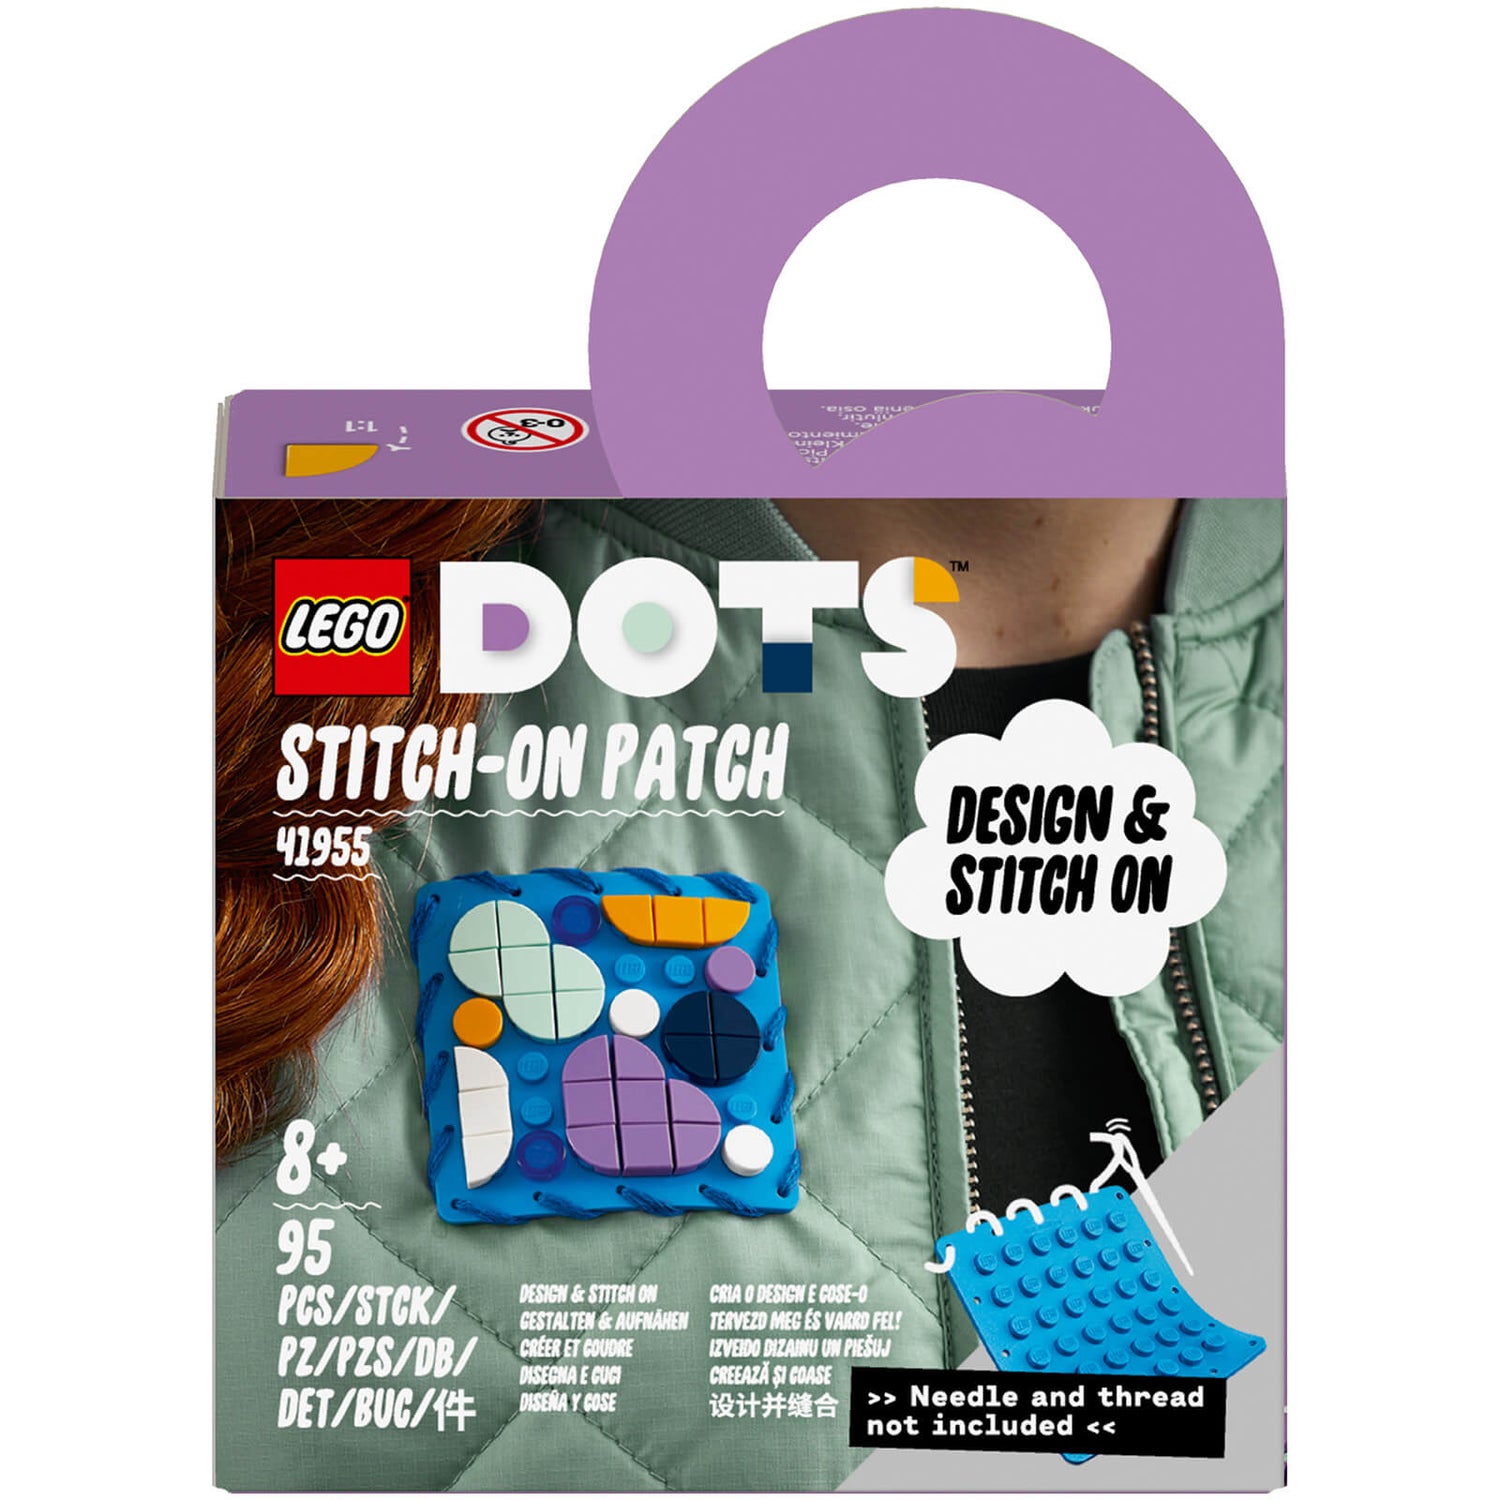 LEGO DOTS: Stitch-on Patch Badge Arts and Crafts Set (41955)